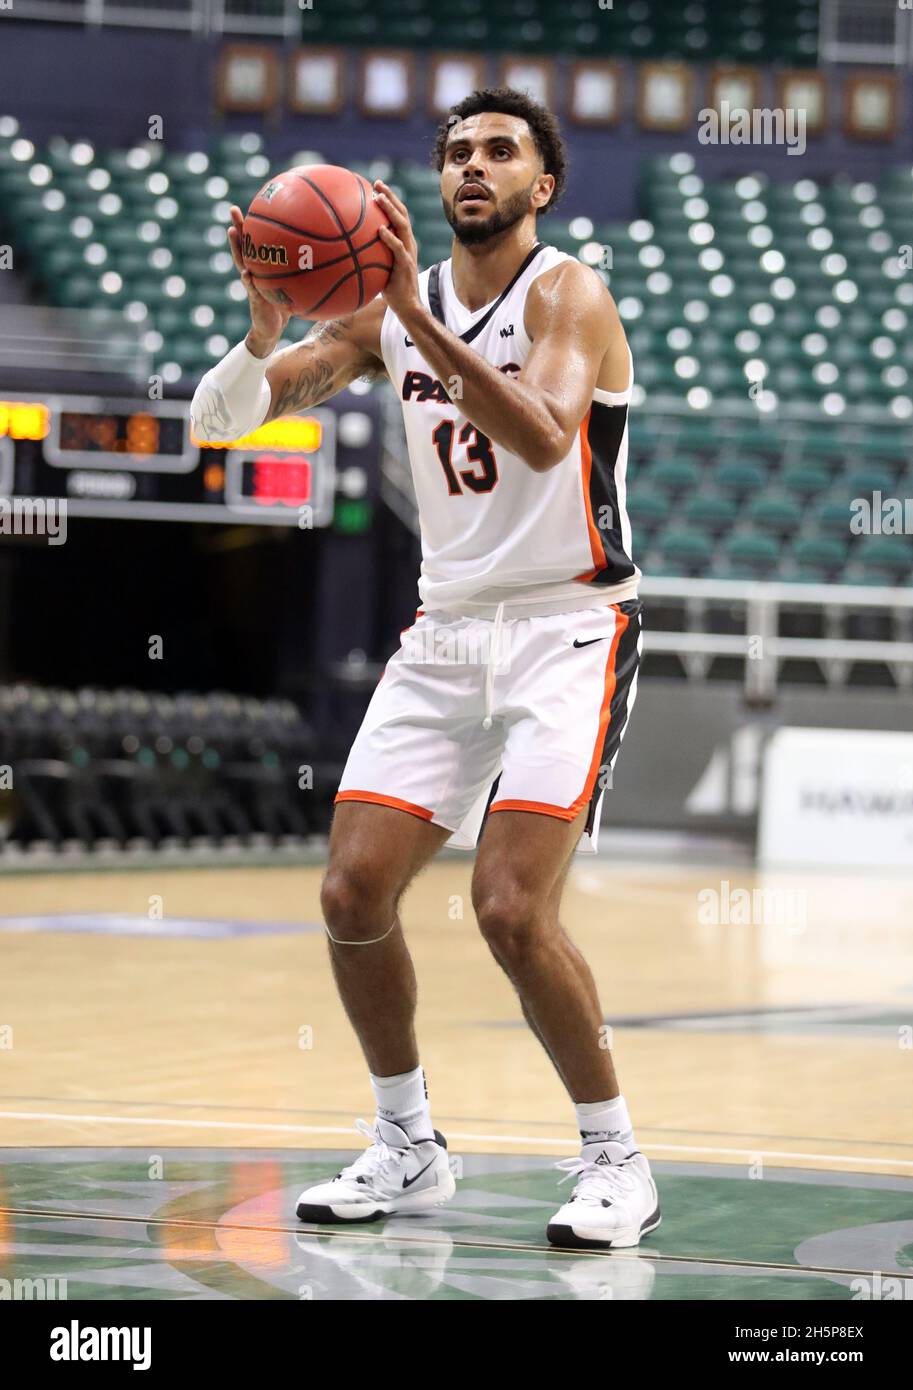 November 10, 2021 - Pacific Tigers forward Jeremiah Bailey #13 shoots a free throw during a game between the Pacific Tigers and the Northern Colorado Bears during the Rainbow Classic at the SimpliFi Arena at the Stan Sheriff Center in Honolulu, HI - Michael Sullivan/CSM Stock Photo